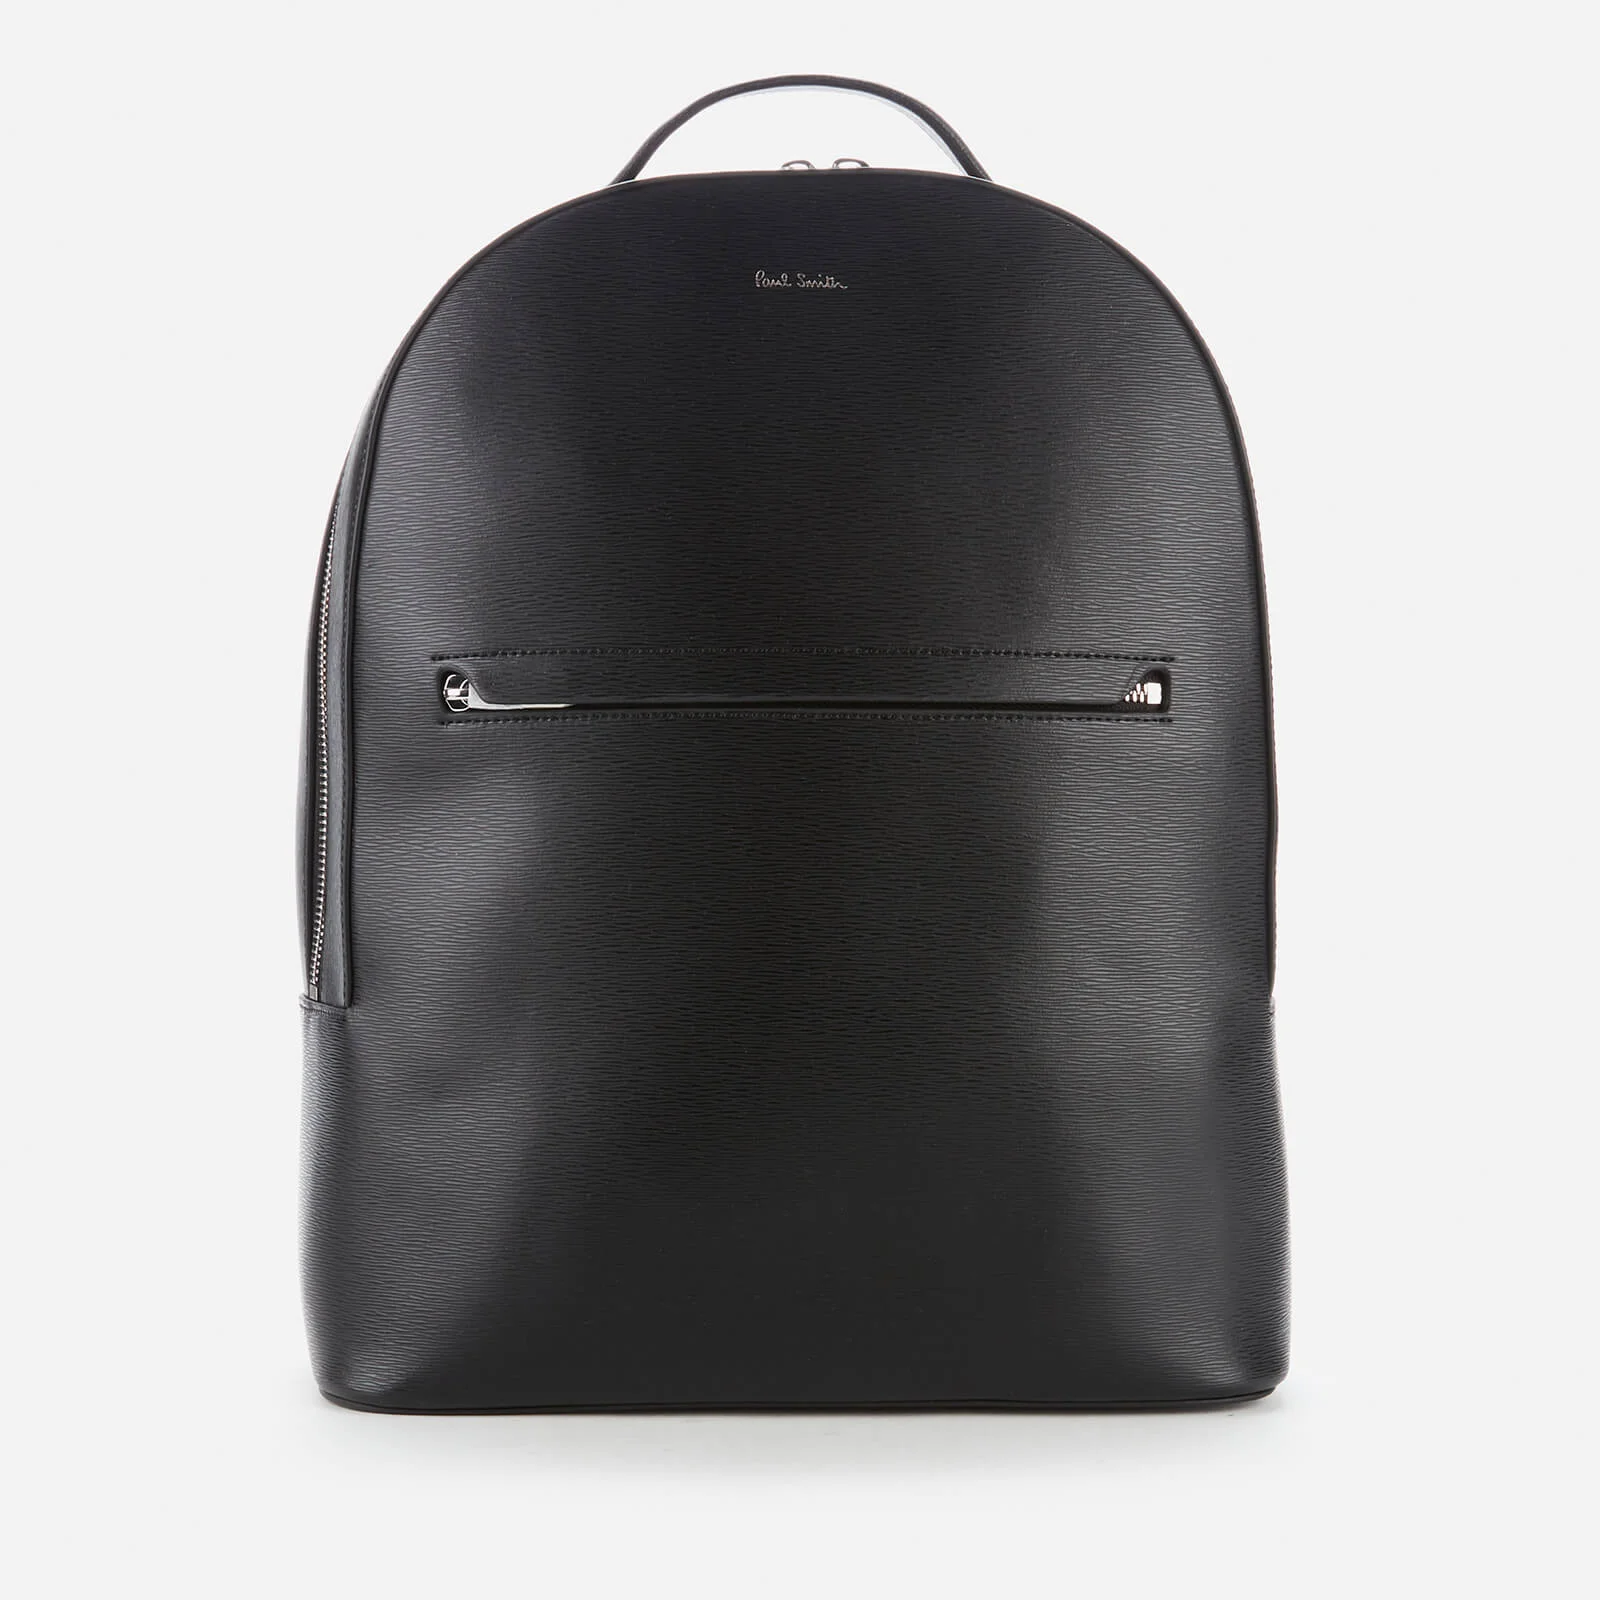 PS Paul Smith Men's Embossed Leather Backpack - Black Image 1